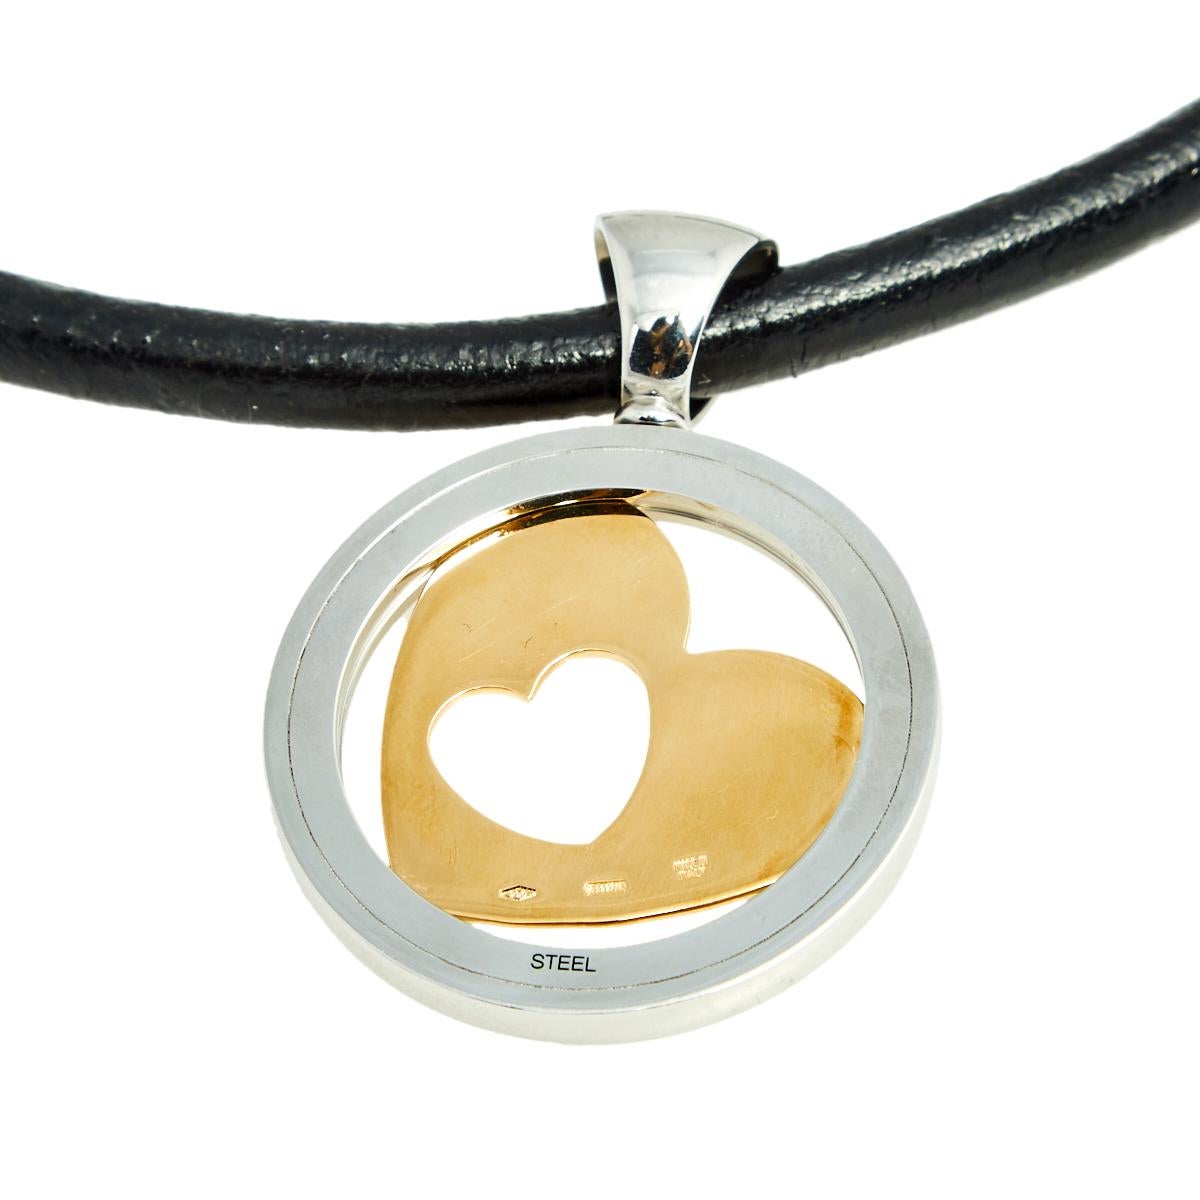 Contemporary Bvlgari Tondo Heart 18k Yellow Gold & Stainless Steel Pendant Cord Necklace